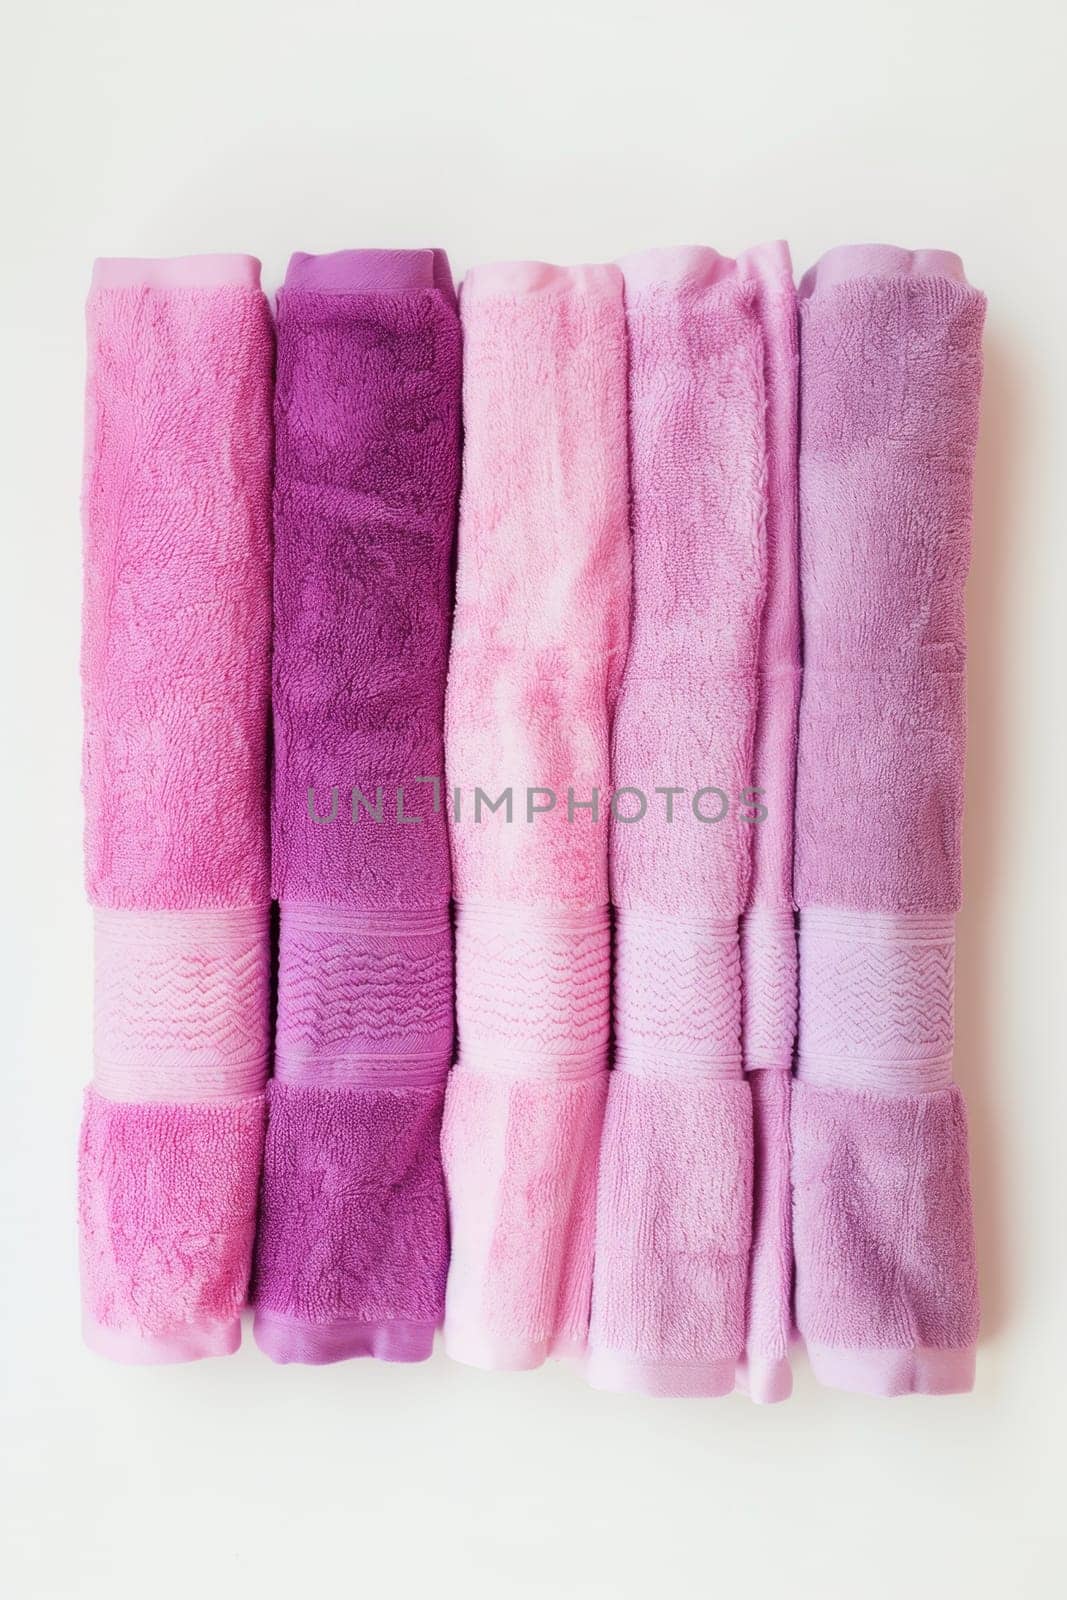 Clean pink and purple towels on a white insulated background by Lobachad